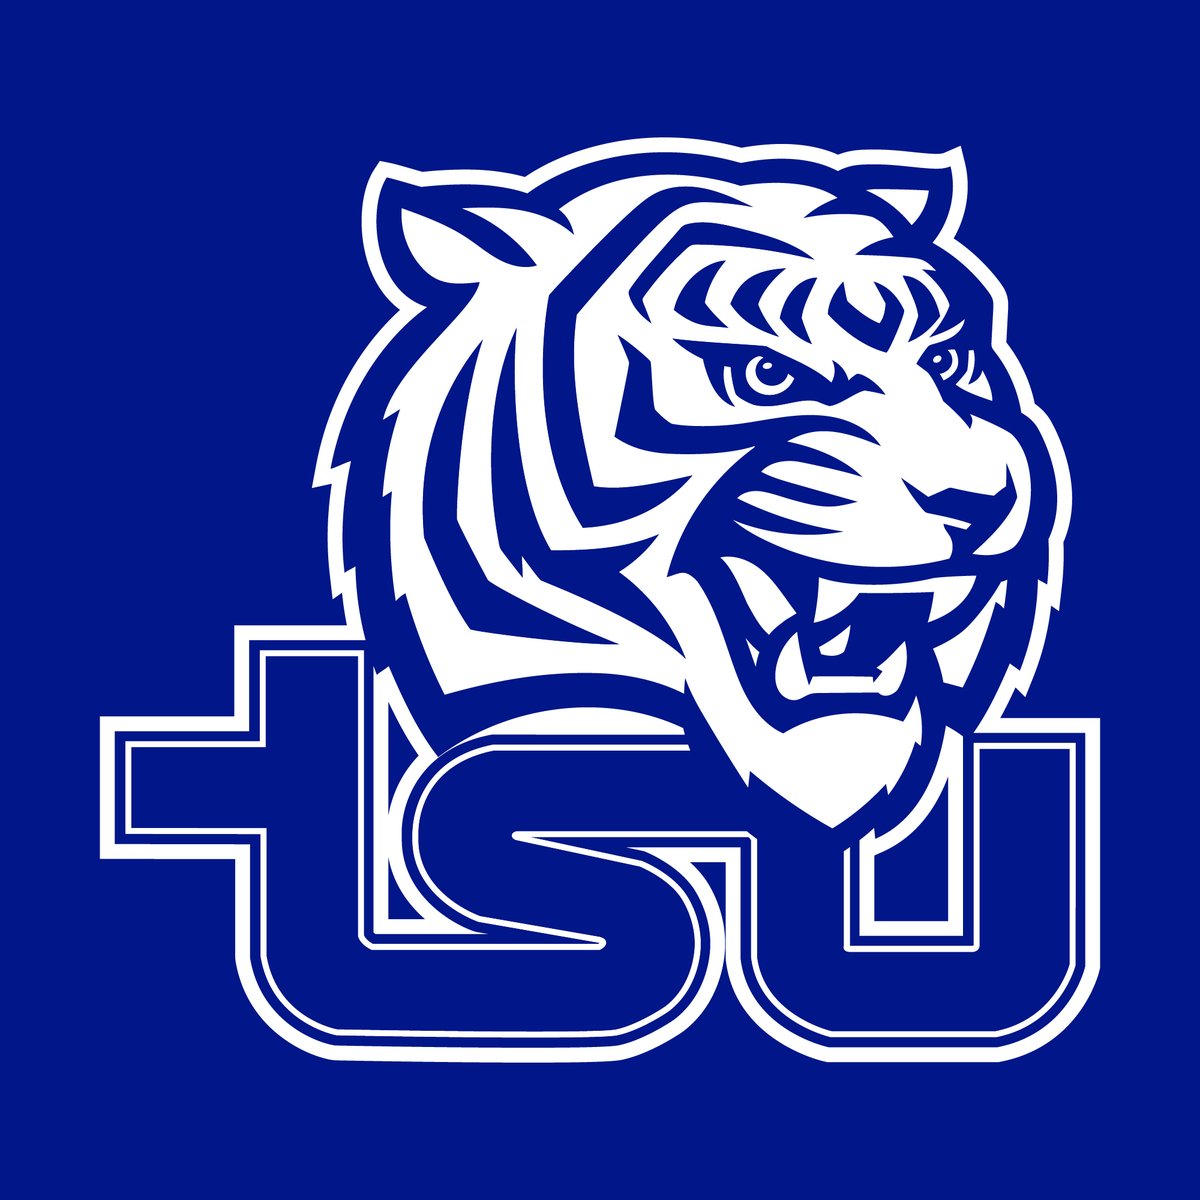 Nothing like homecoming @TSU_Tigers as week-long celebration culminates with homecoming game @NissanStadium with @TSUTigersFB of coach @EddieGeorge2727 playing host to @NorfolkStateFB Former @Titans WR Chris Sanders joins broadcast @NashSportsRadio pre-game 4:30 & kickoff at 5.